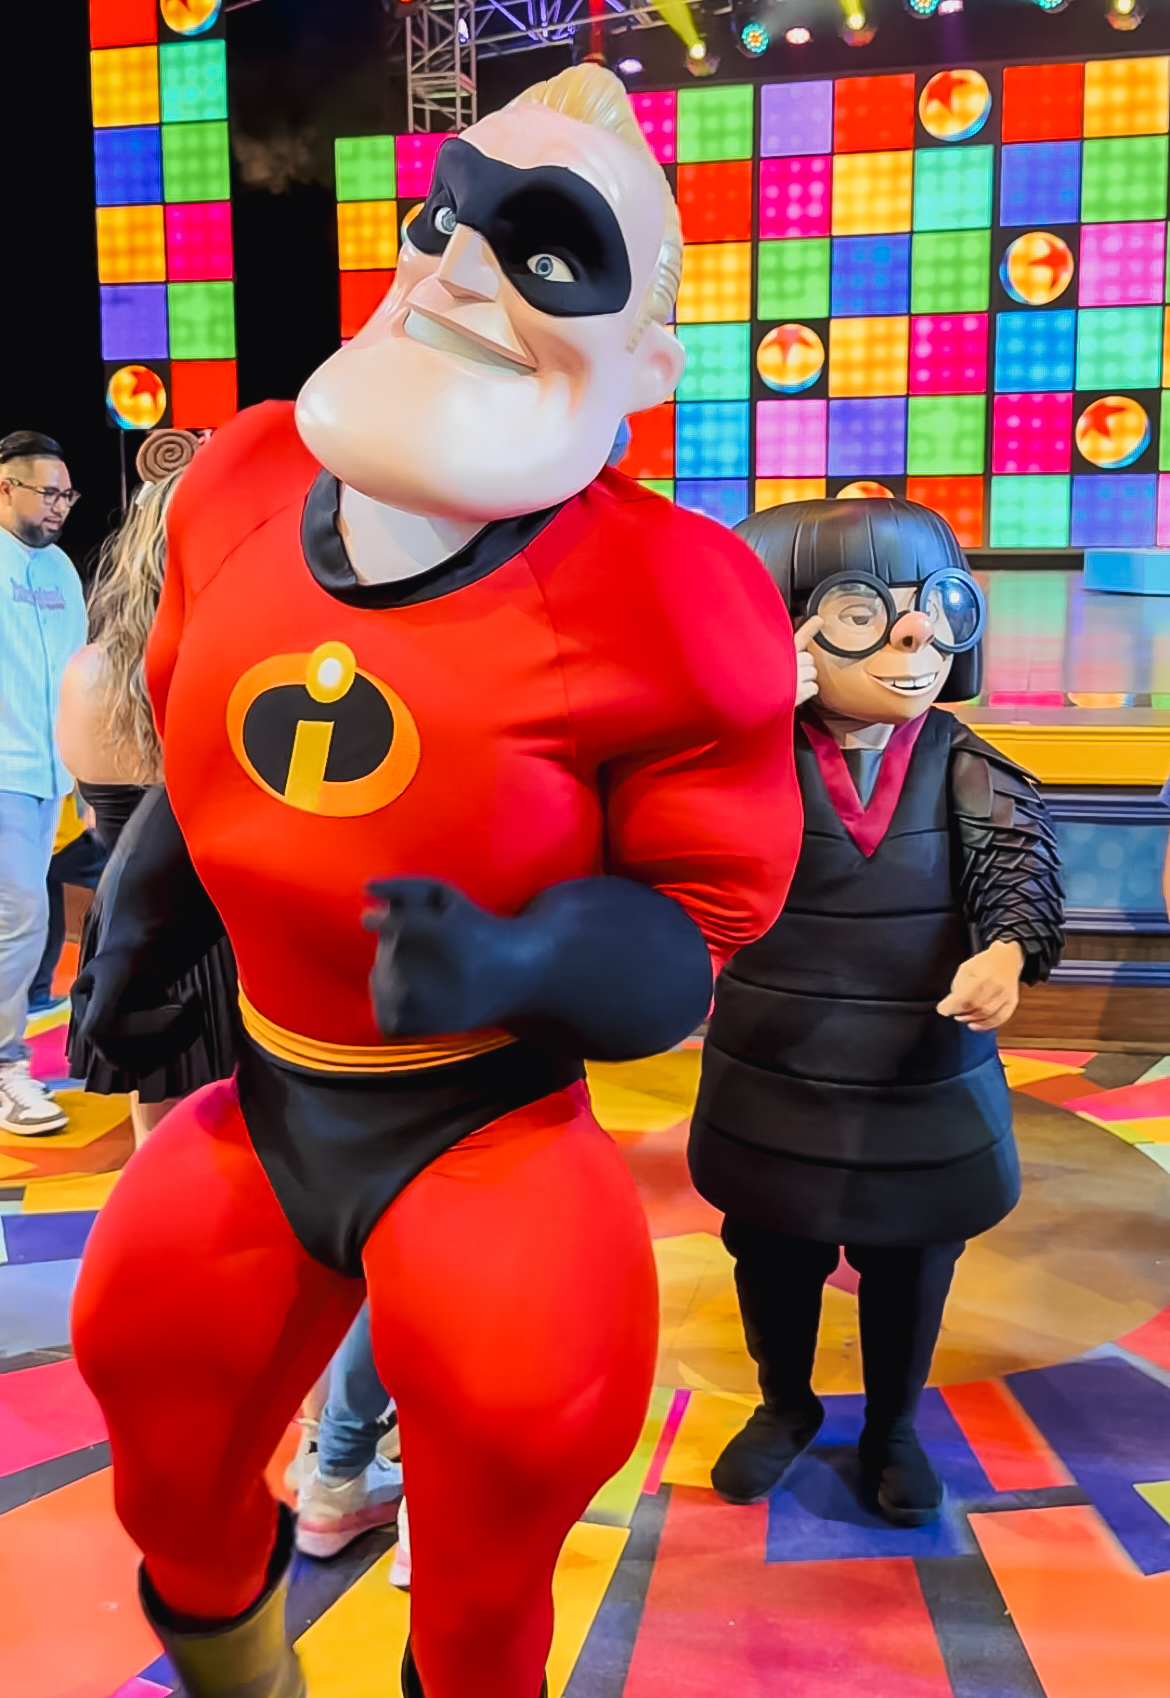 Mr. Incredible and Edna Mode on the dance floor.